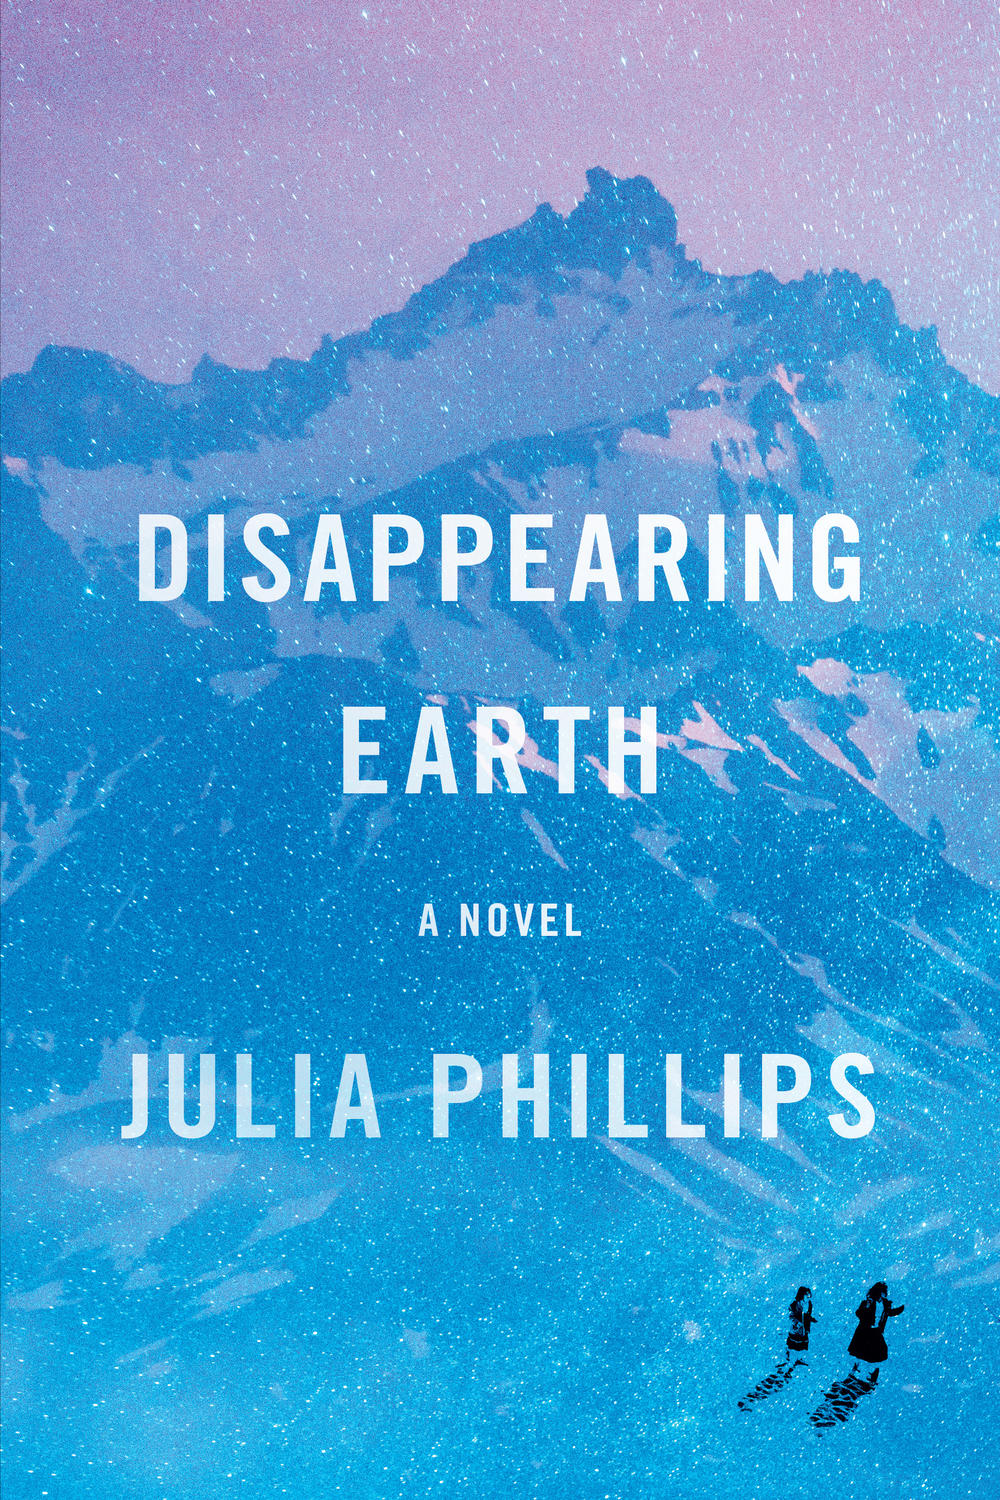 Julia Phillips' new novel is called "Disappearing Earth."